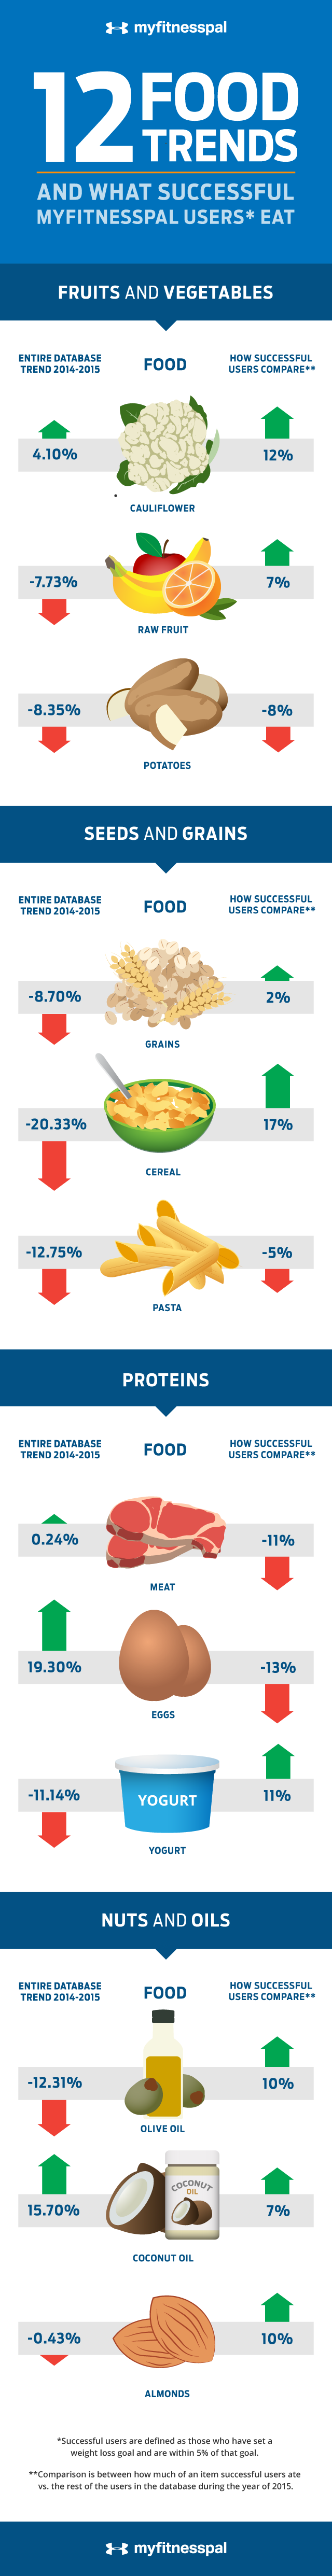 These Are The Foods Successful Dieters Eat Most [Infographic]